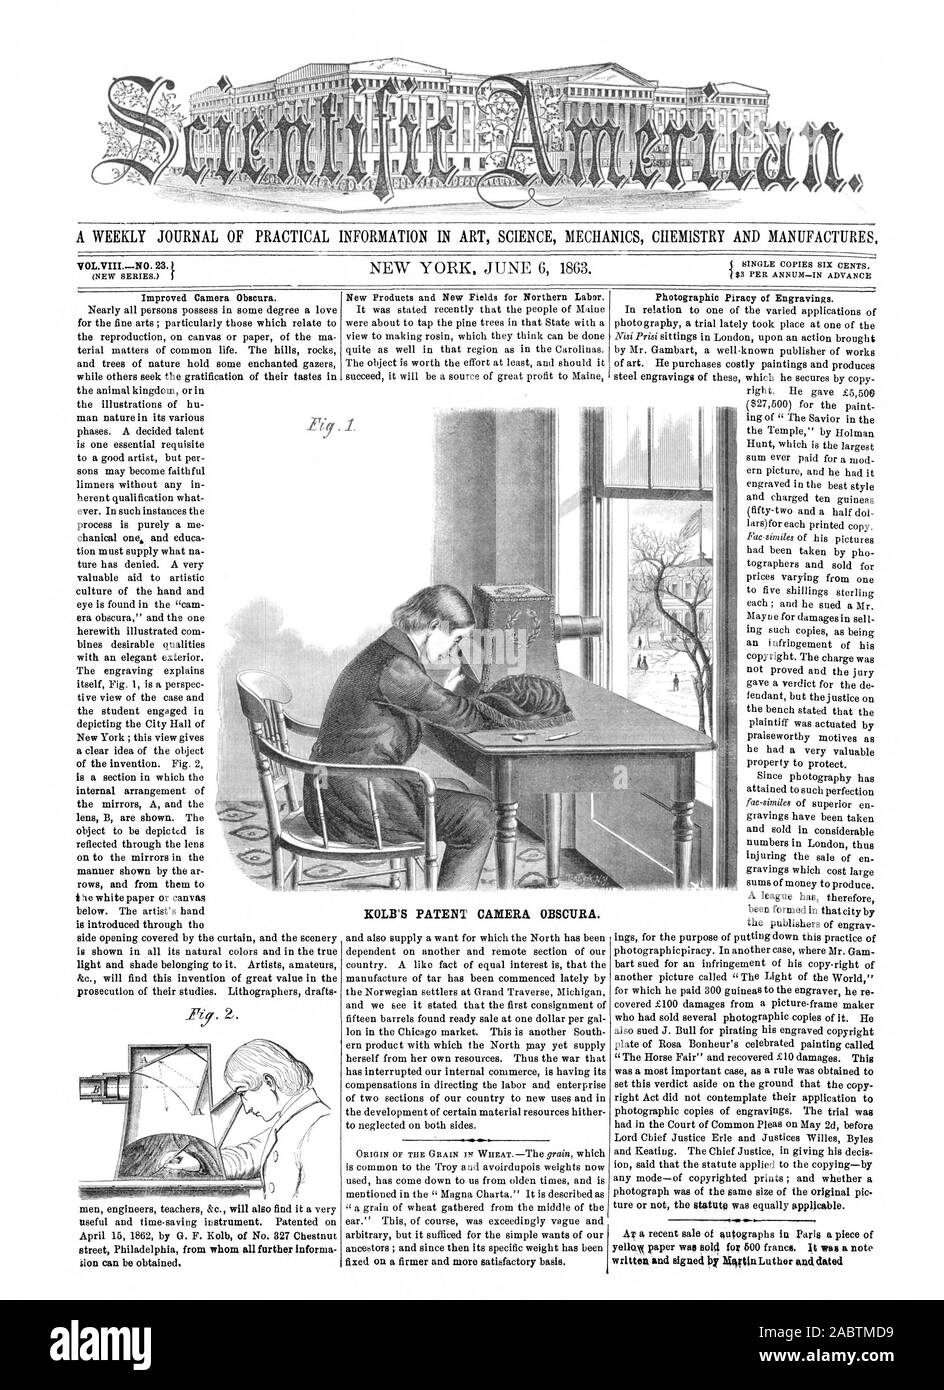 A WEEKLY JOURNAL OF PRACTICAL INFORMATION IN ART SCIENCE MECHANICS  CIIEMISTRY AND MANUFACTURES KOLB'S PATENT CAMERA OBSCURA., scientific  american, 1863-06-06 Stock Photo - Alamy